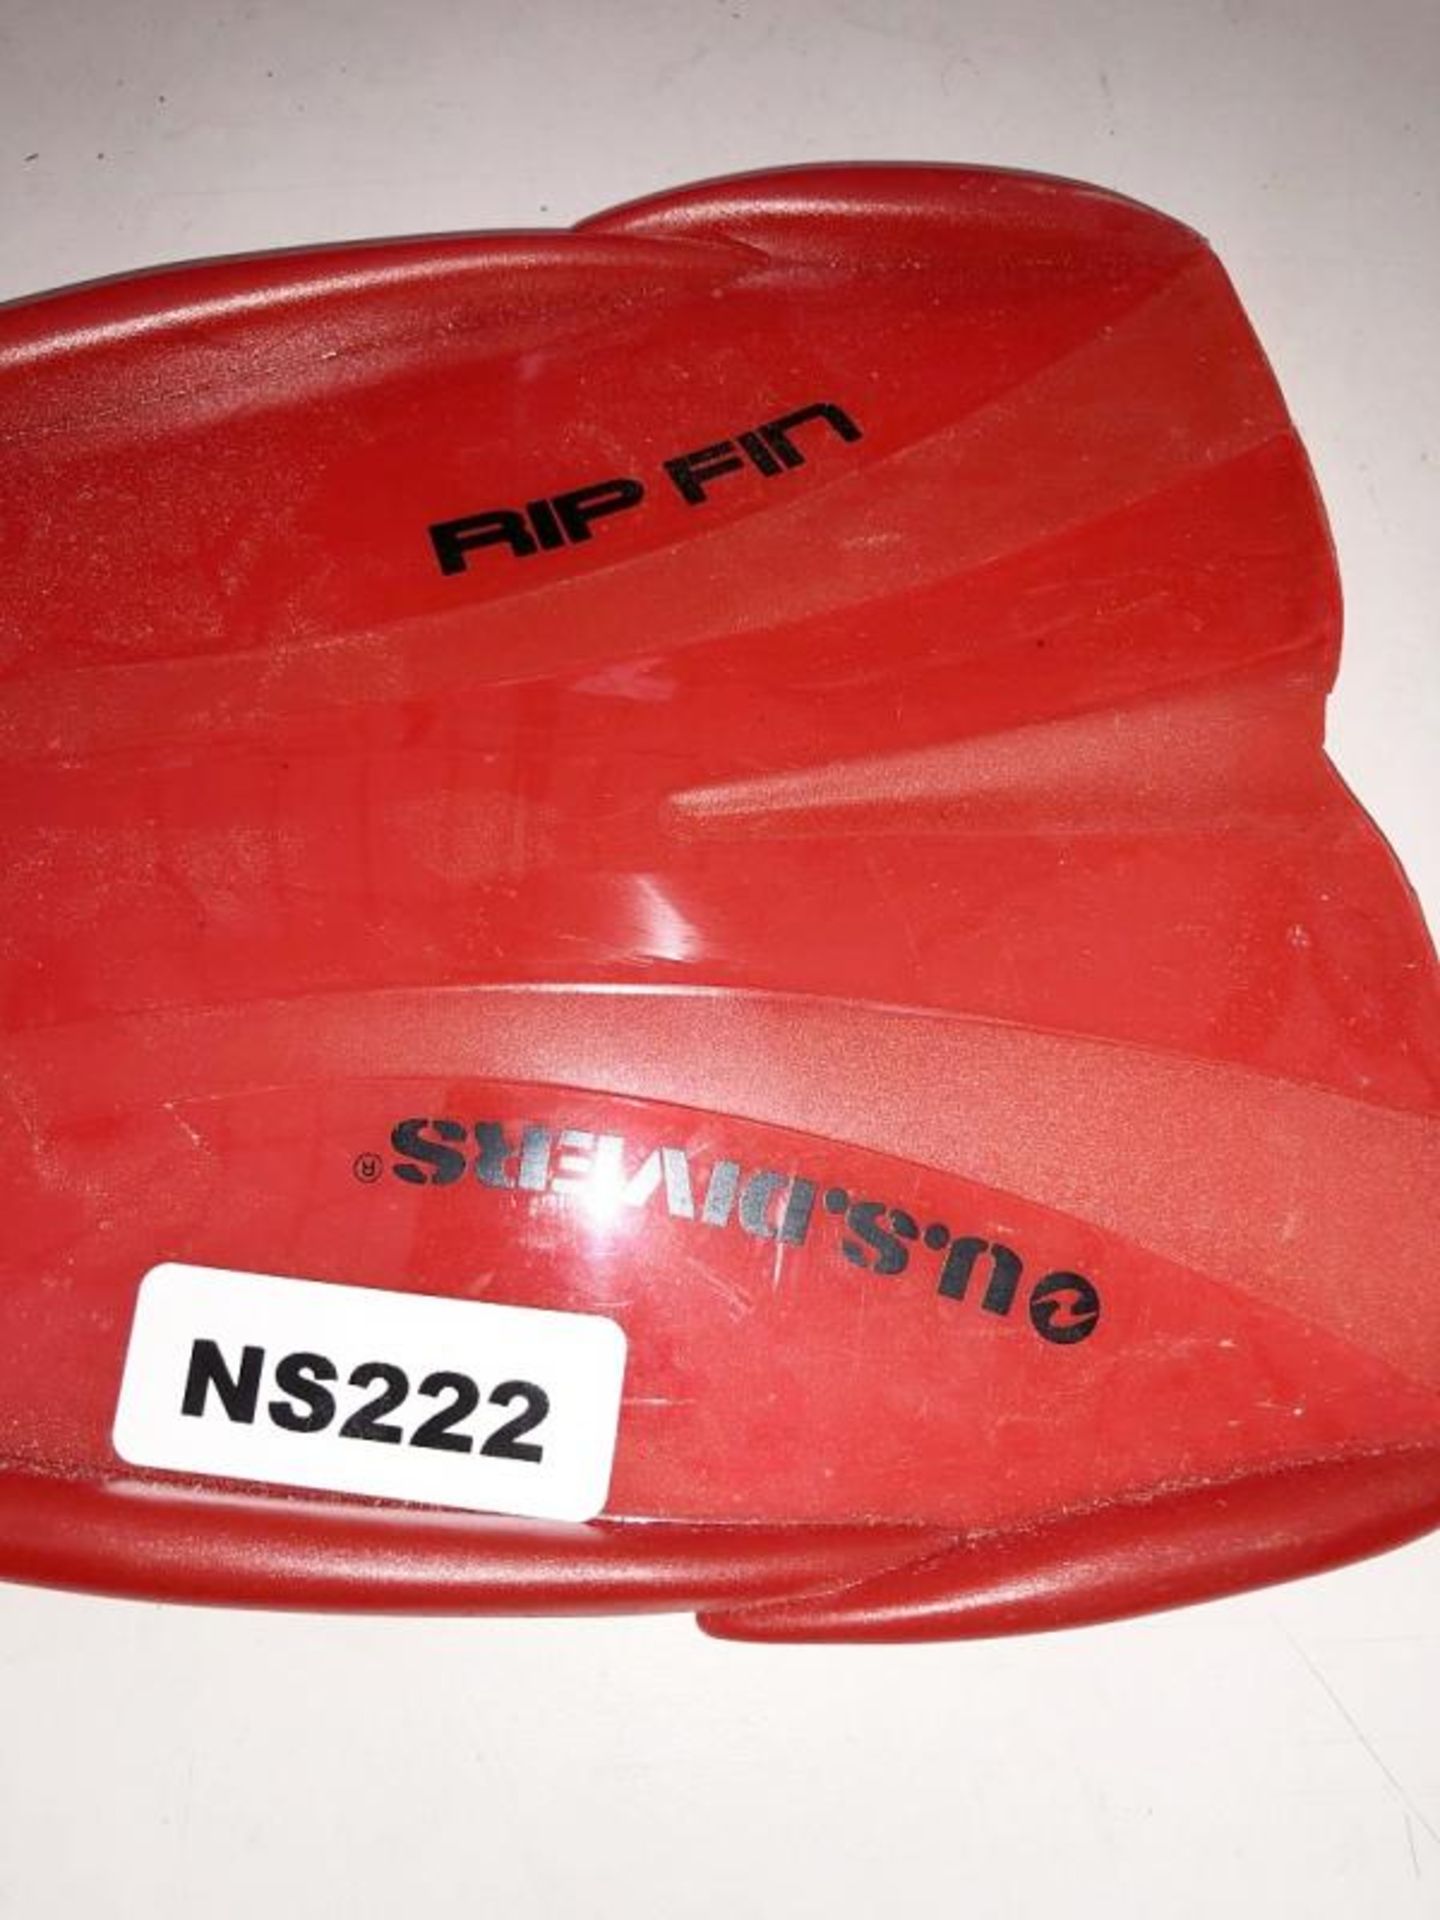 3 x Pairs Of Children's Diving Fins - CL349 - Location: Altrincham WA14 - Image 3 of 9